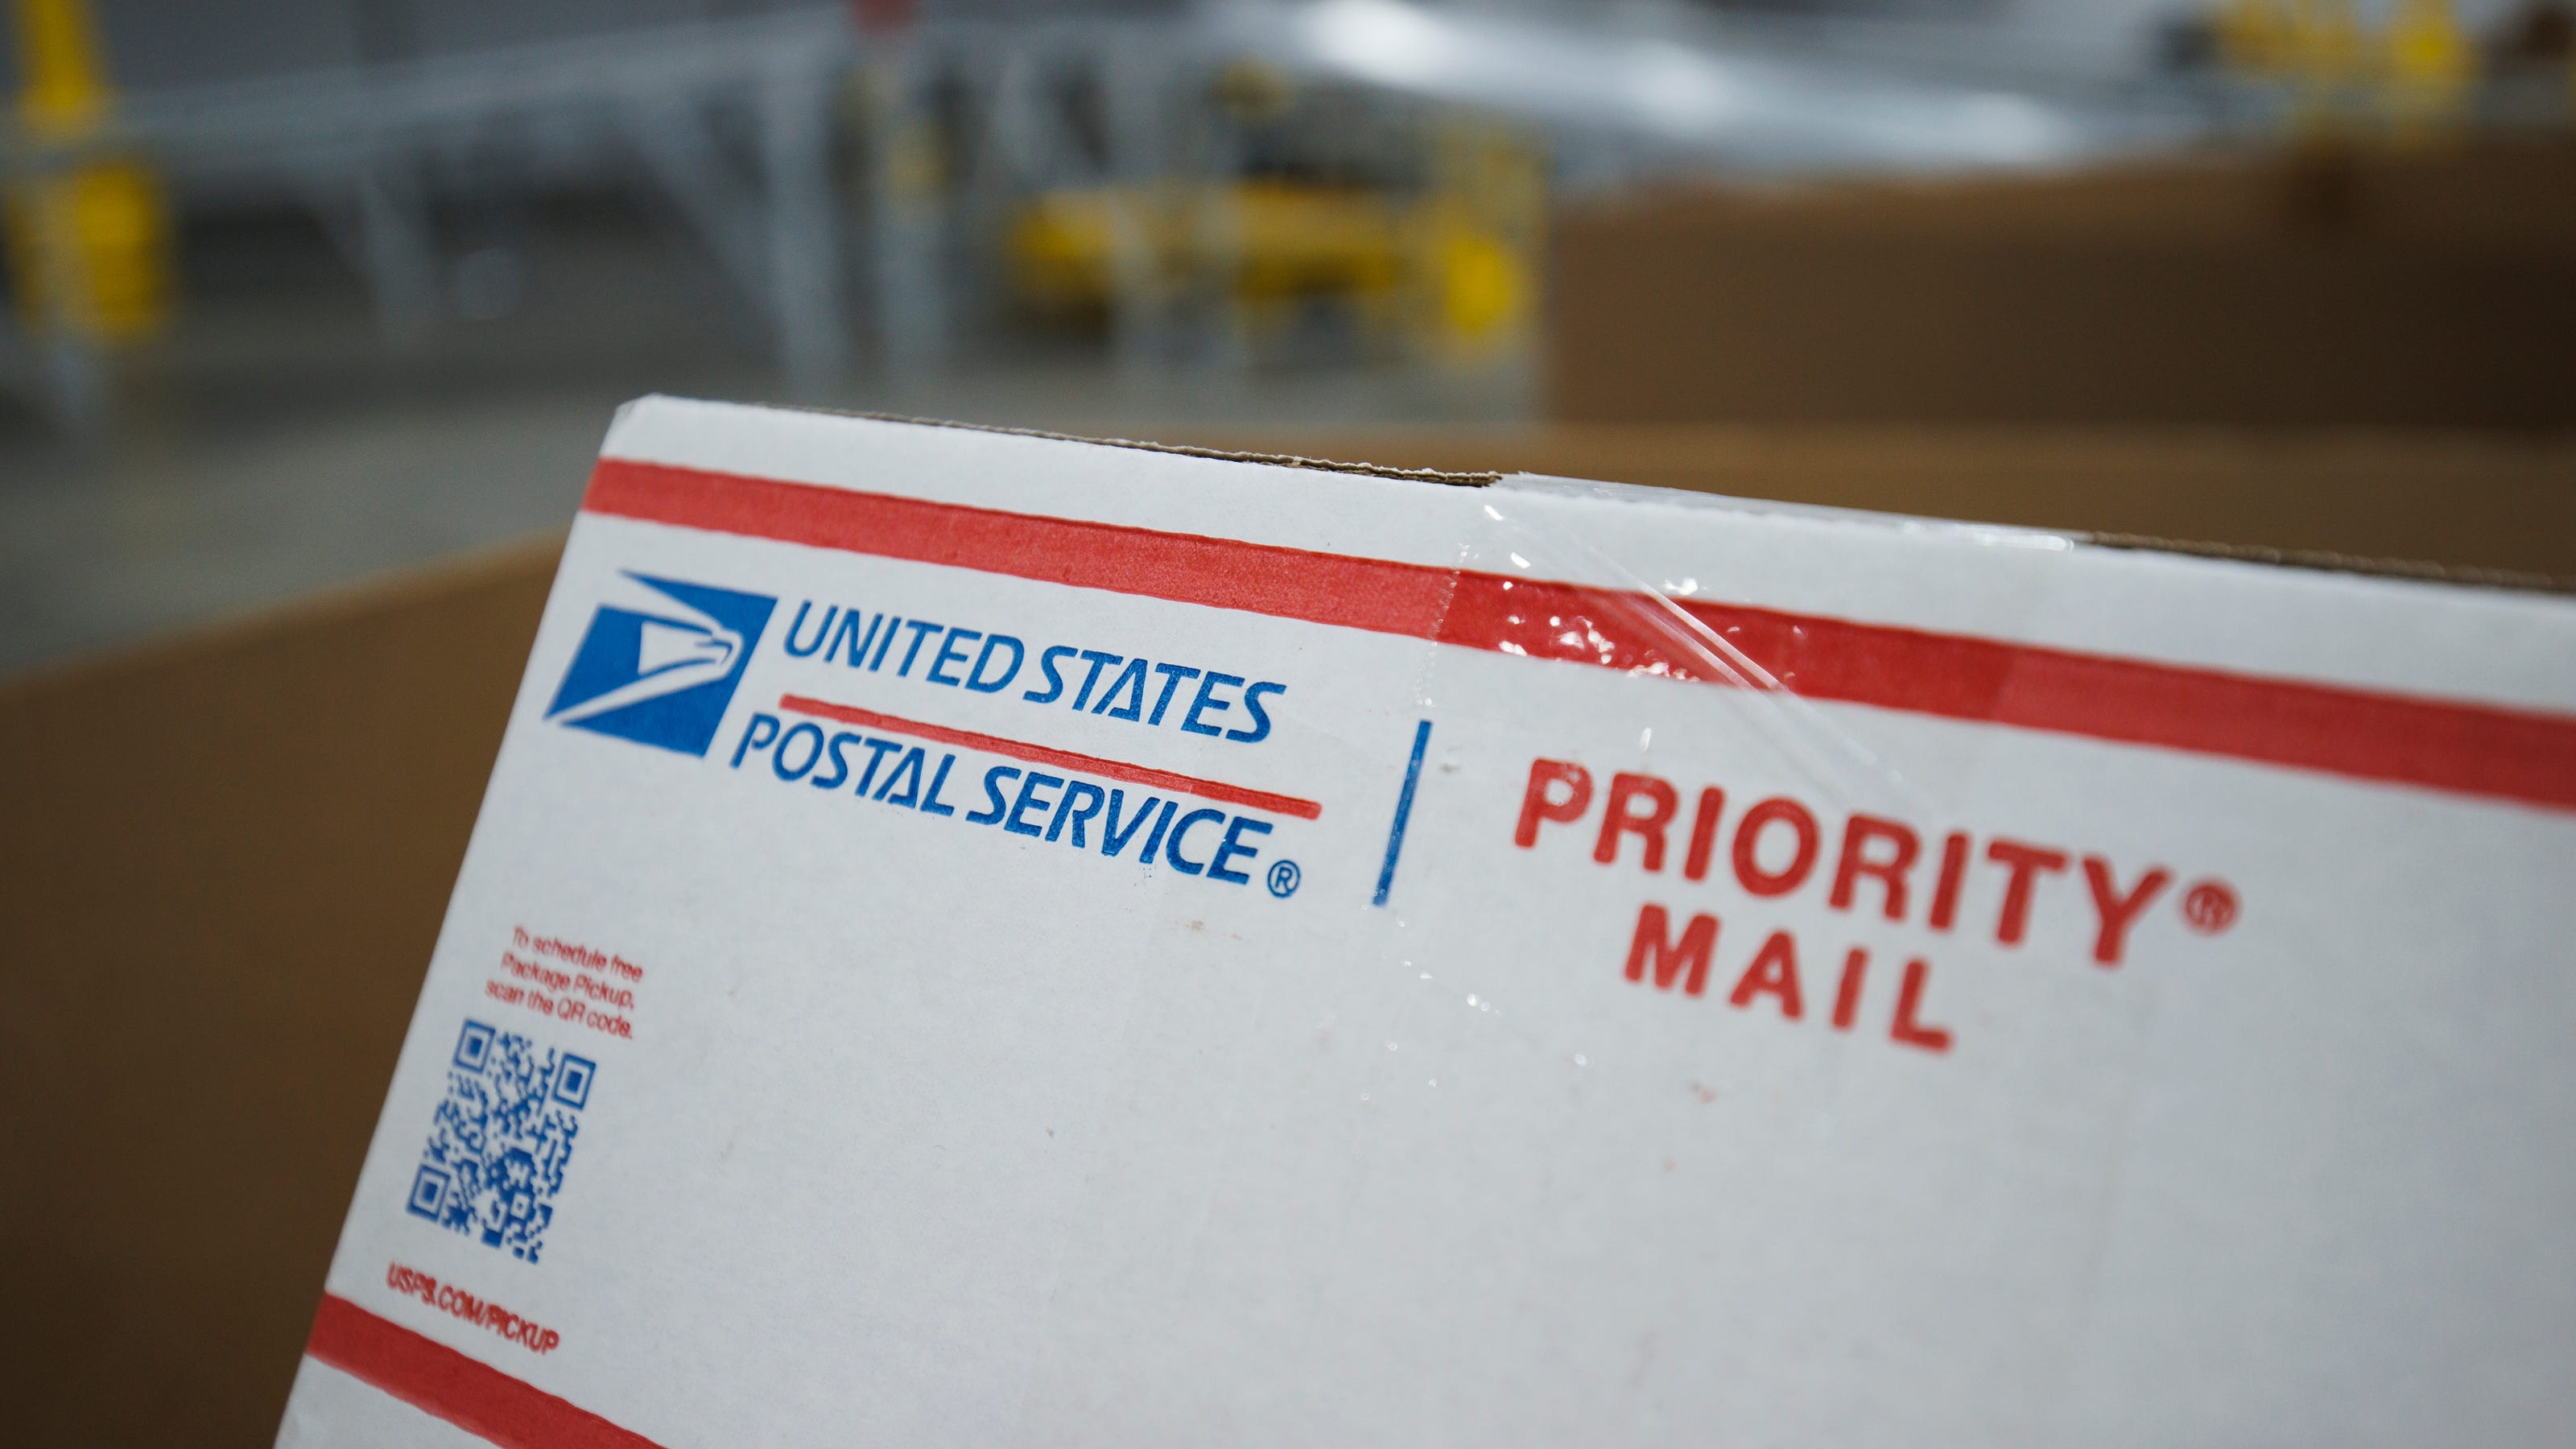 Holiday shipping deadlines for USPS, UPS, FedEx for Christmas delivery